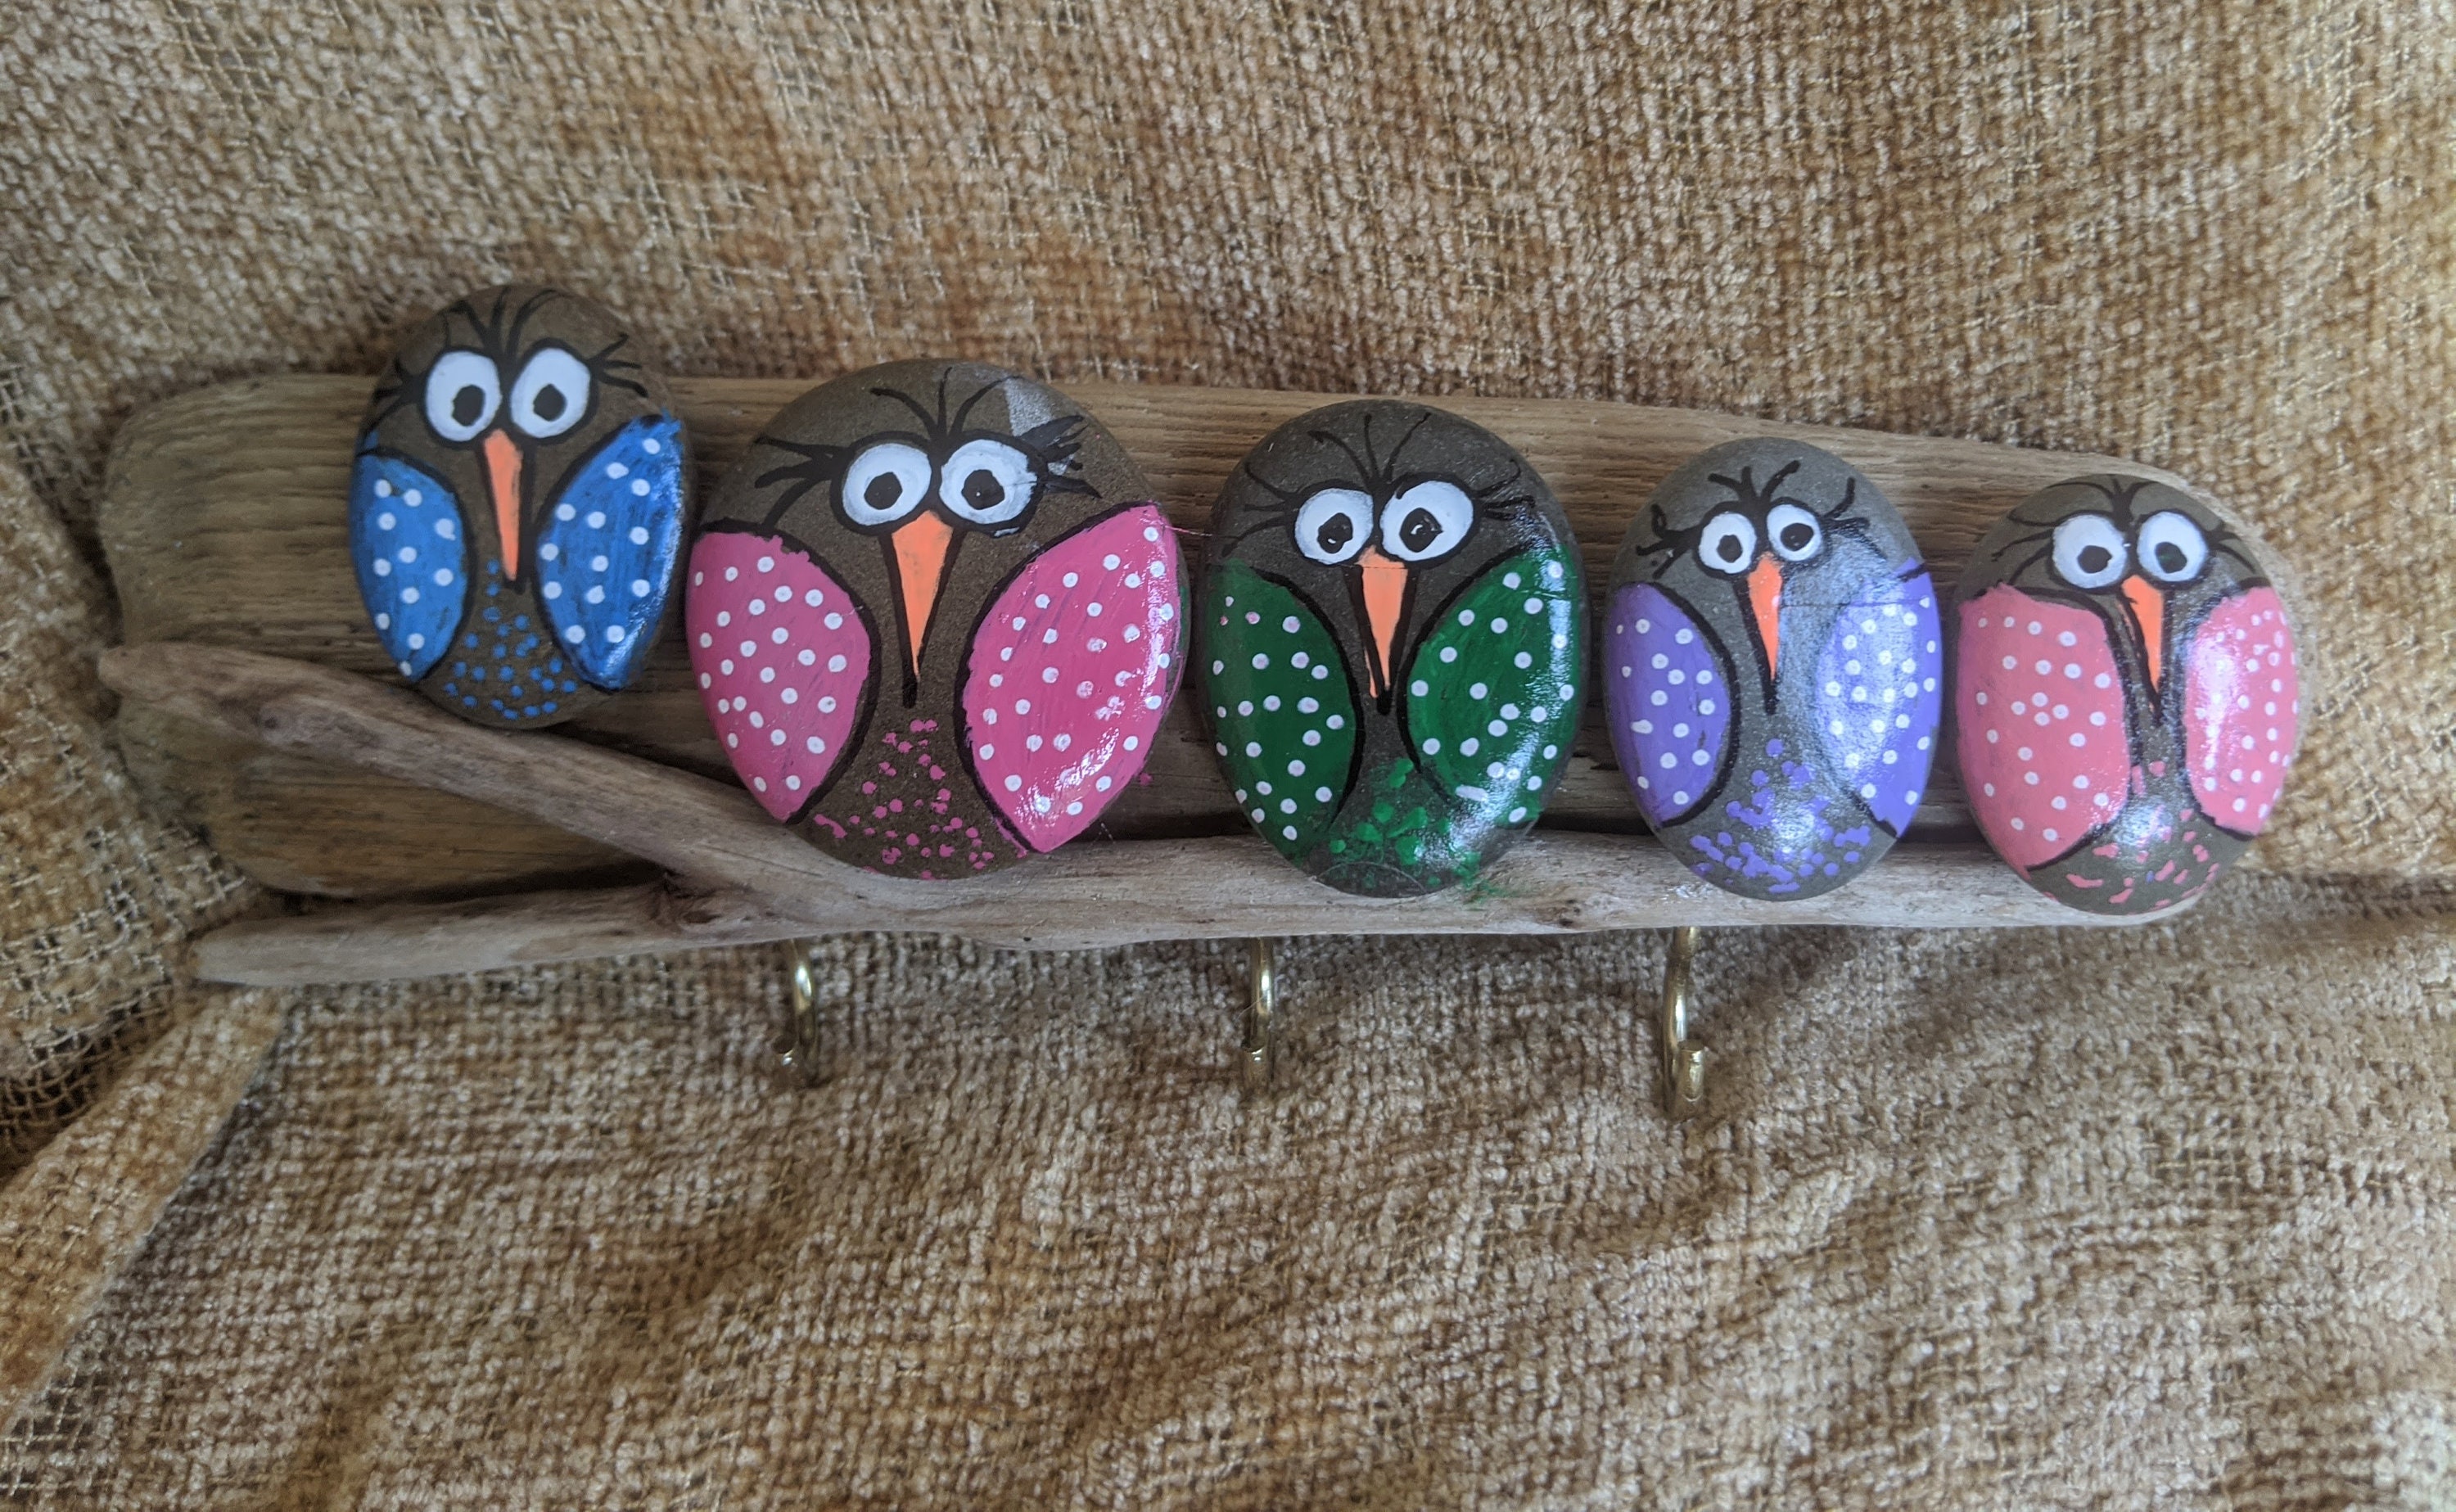 Owl Painted Rocks - Frugal Fun For Boys and Girls